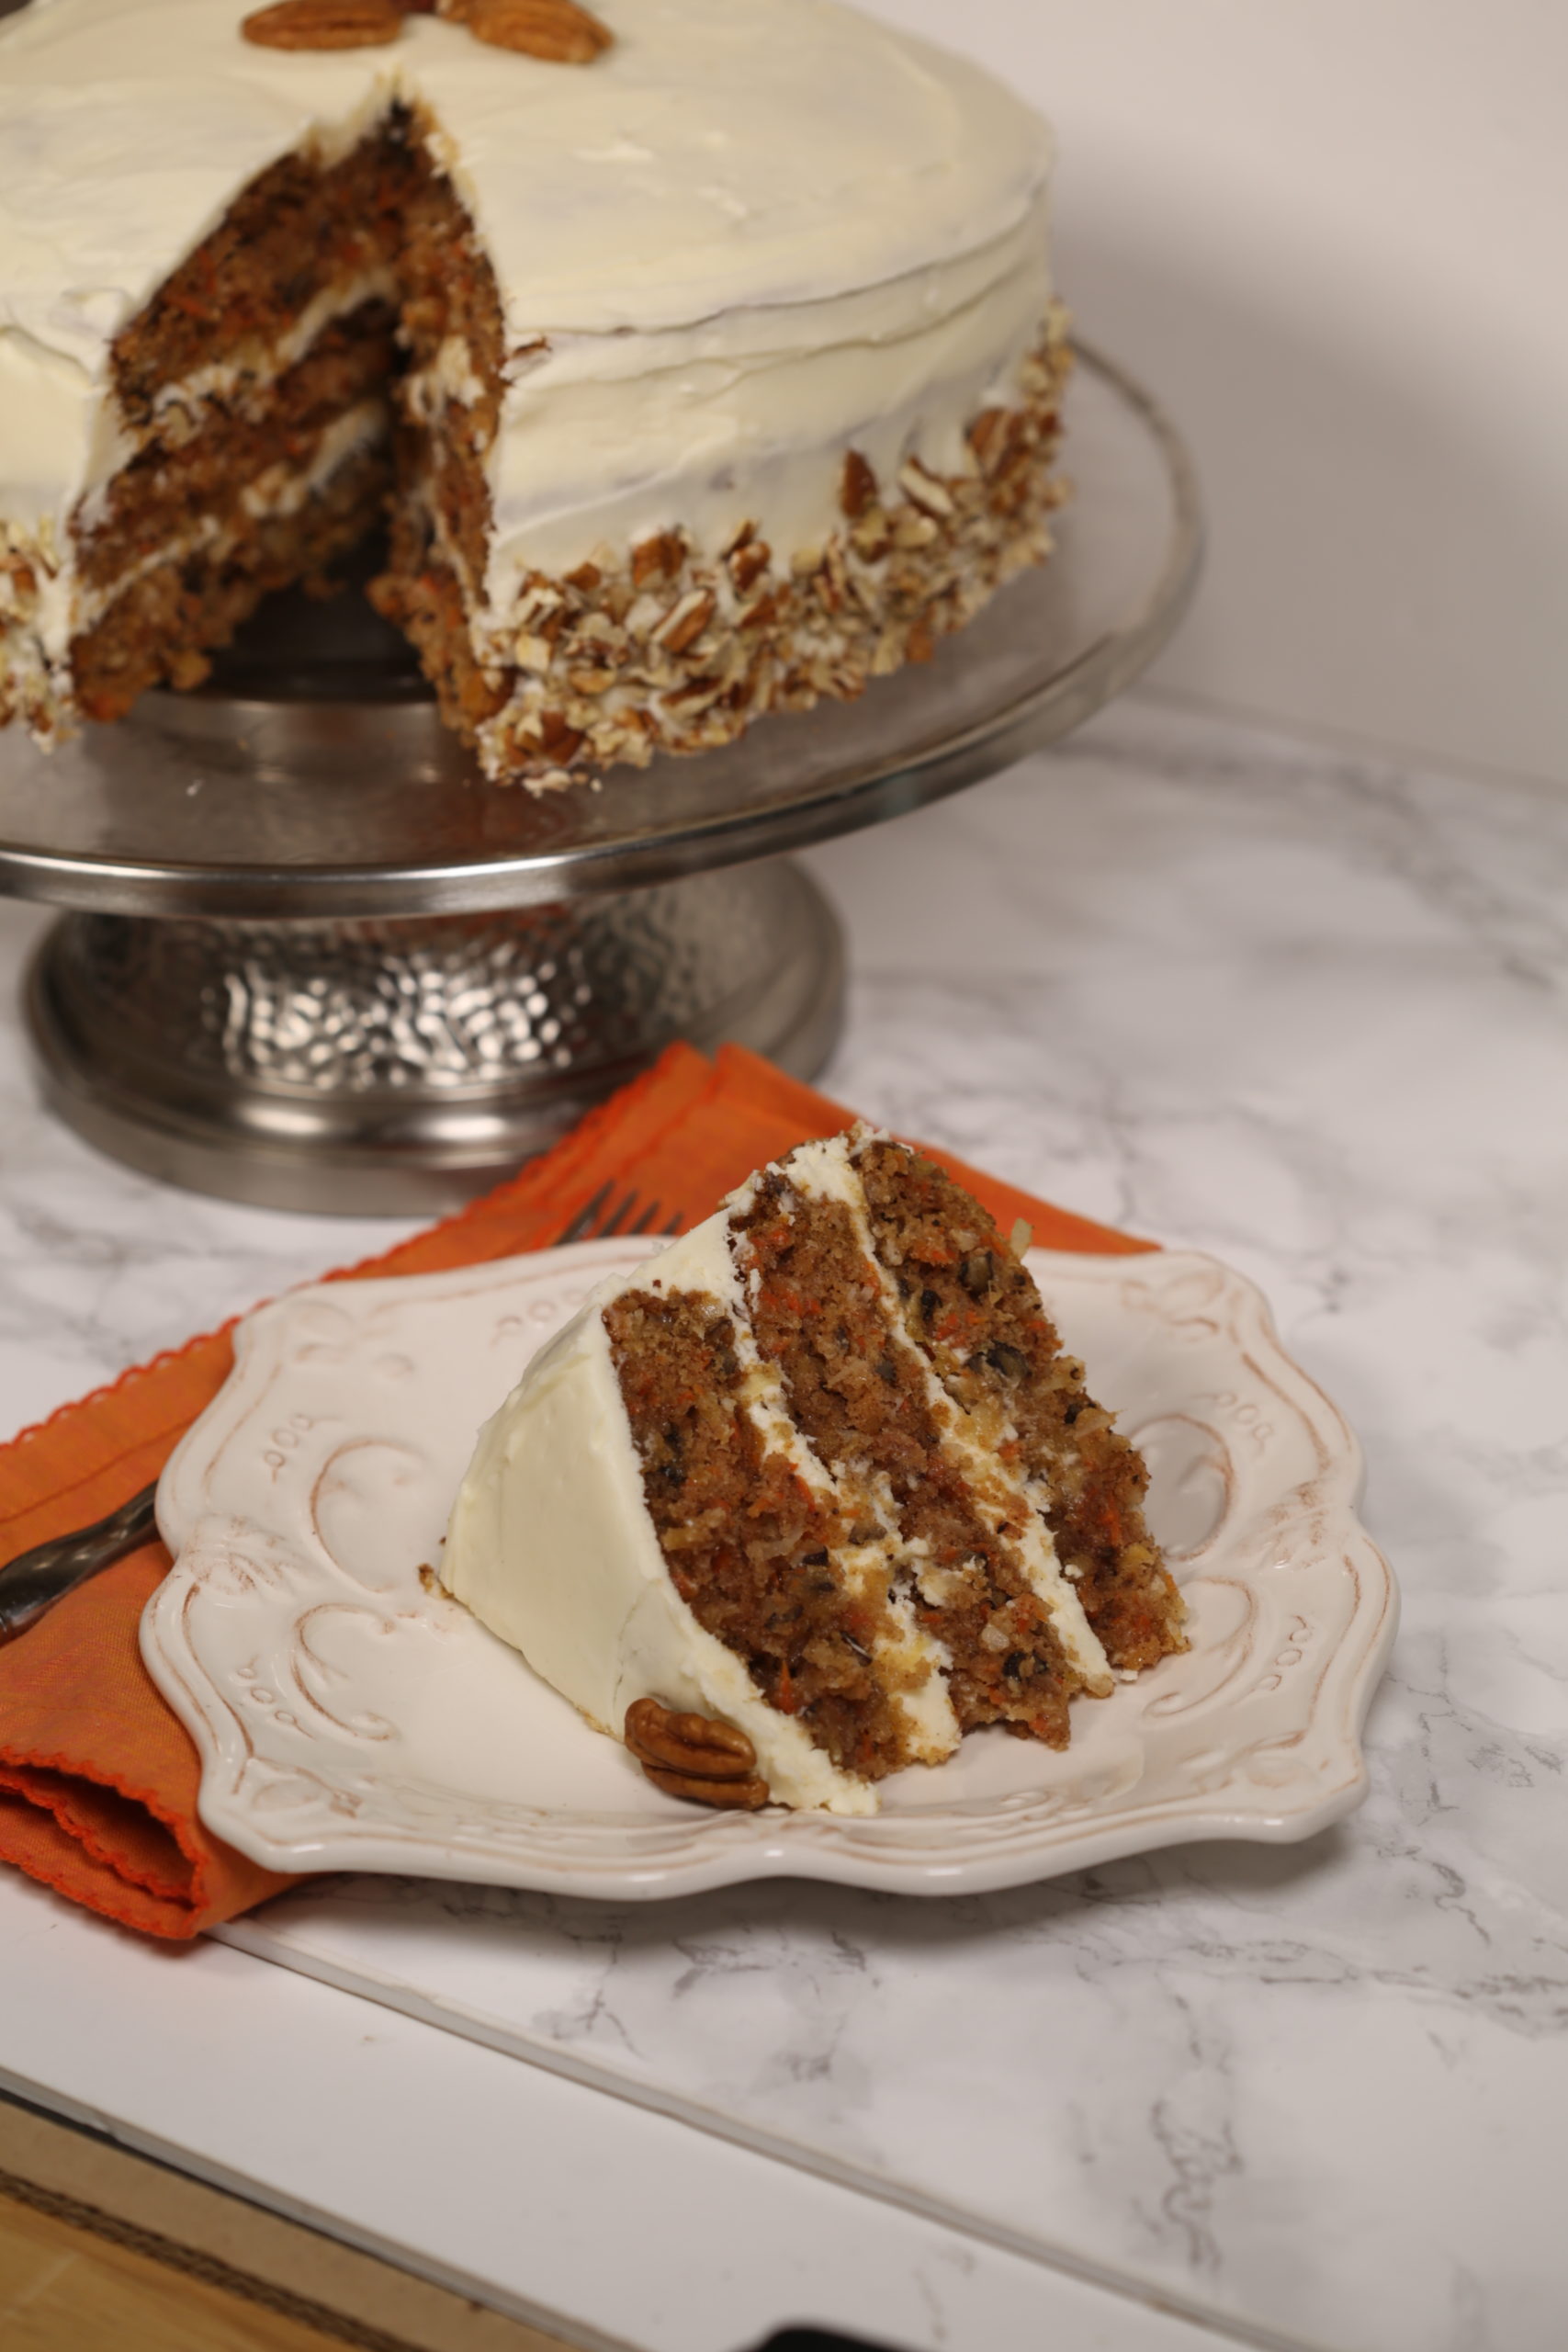 The Ultimate Carrot Cake in a side view with the cake with a slice cut out in the background.